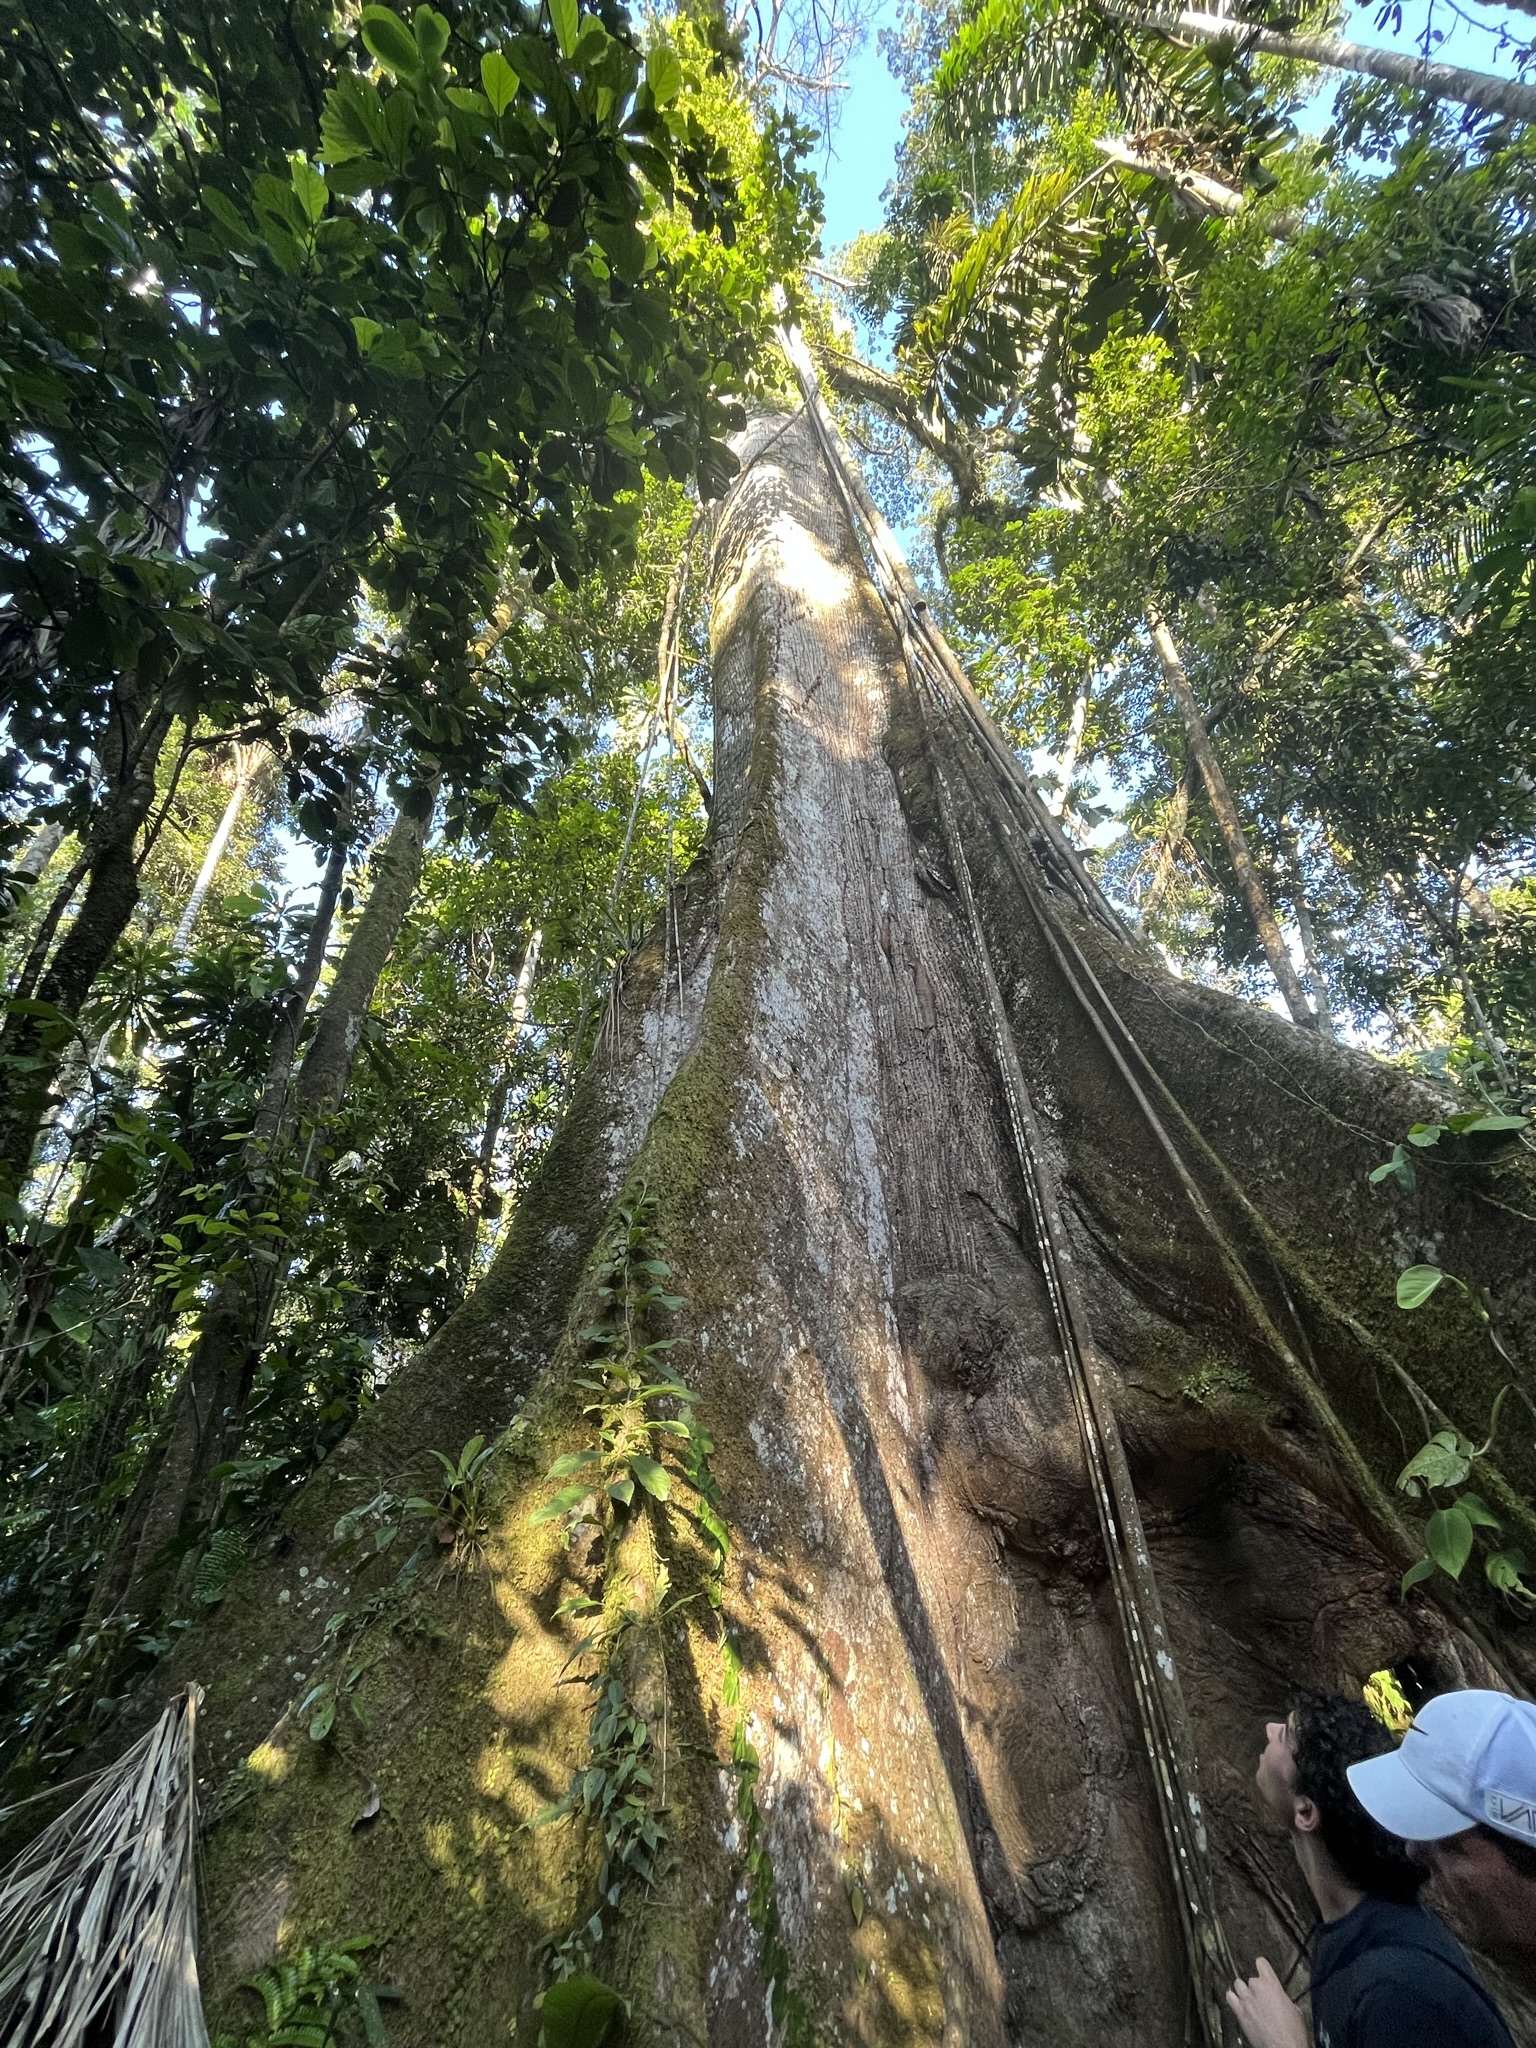 The Rainforest in Ecuador and the immediate need for sustainability